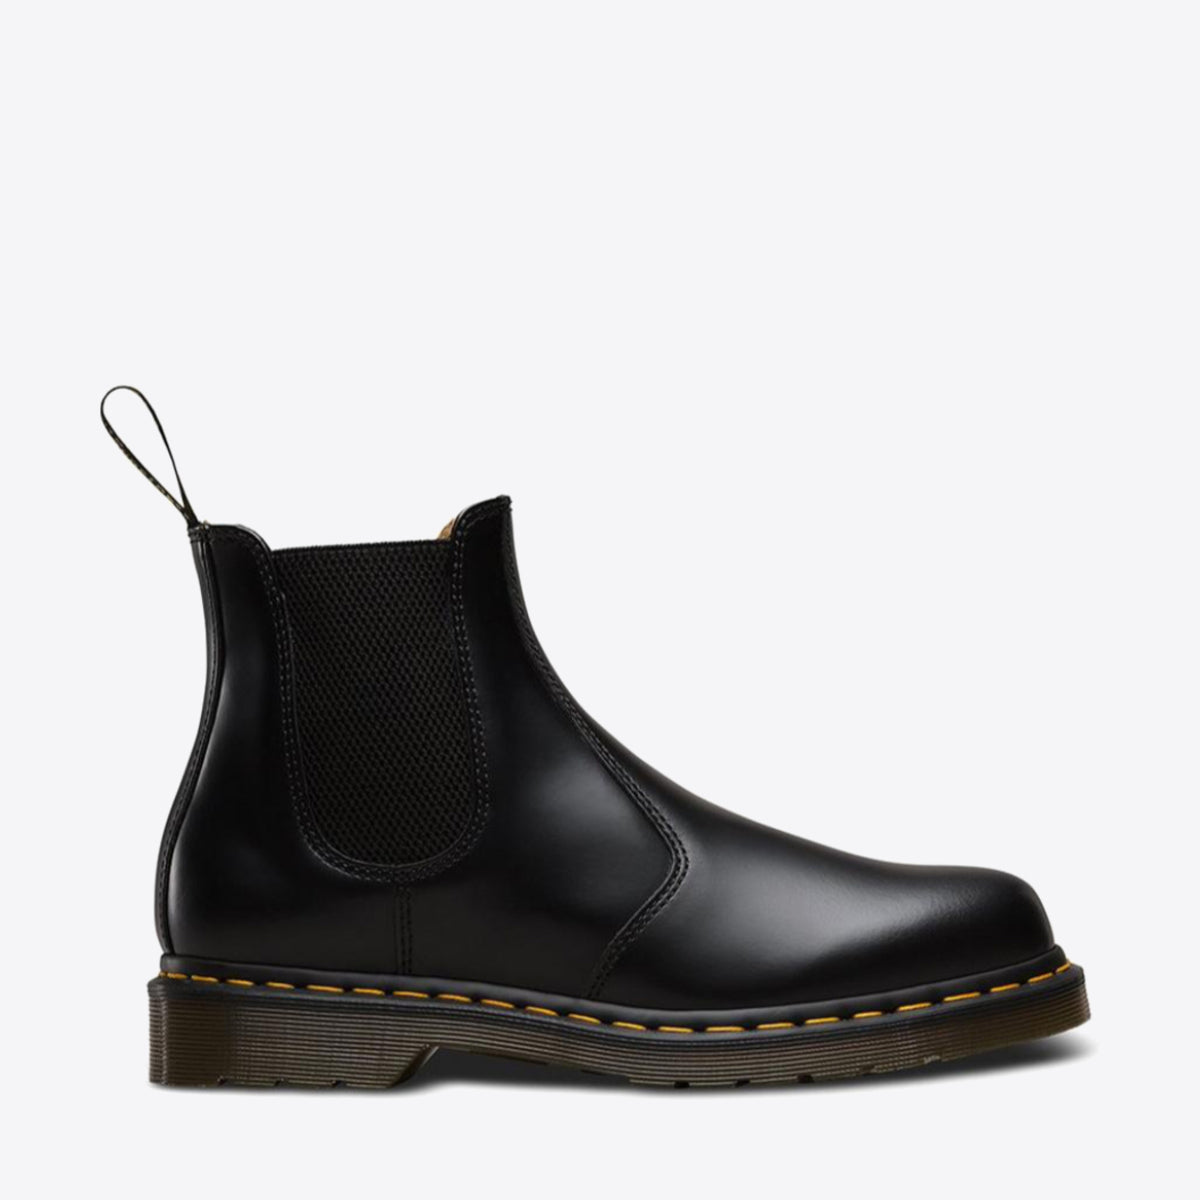 DR MARTENS 2976 Yellow Stitch Chelsea Boot Black Smooth - Image 2